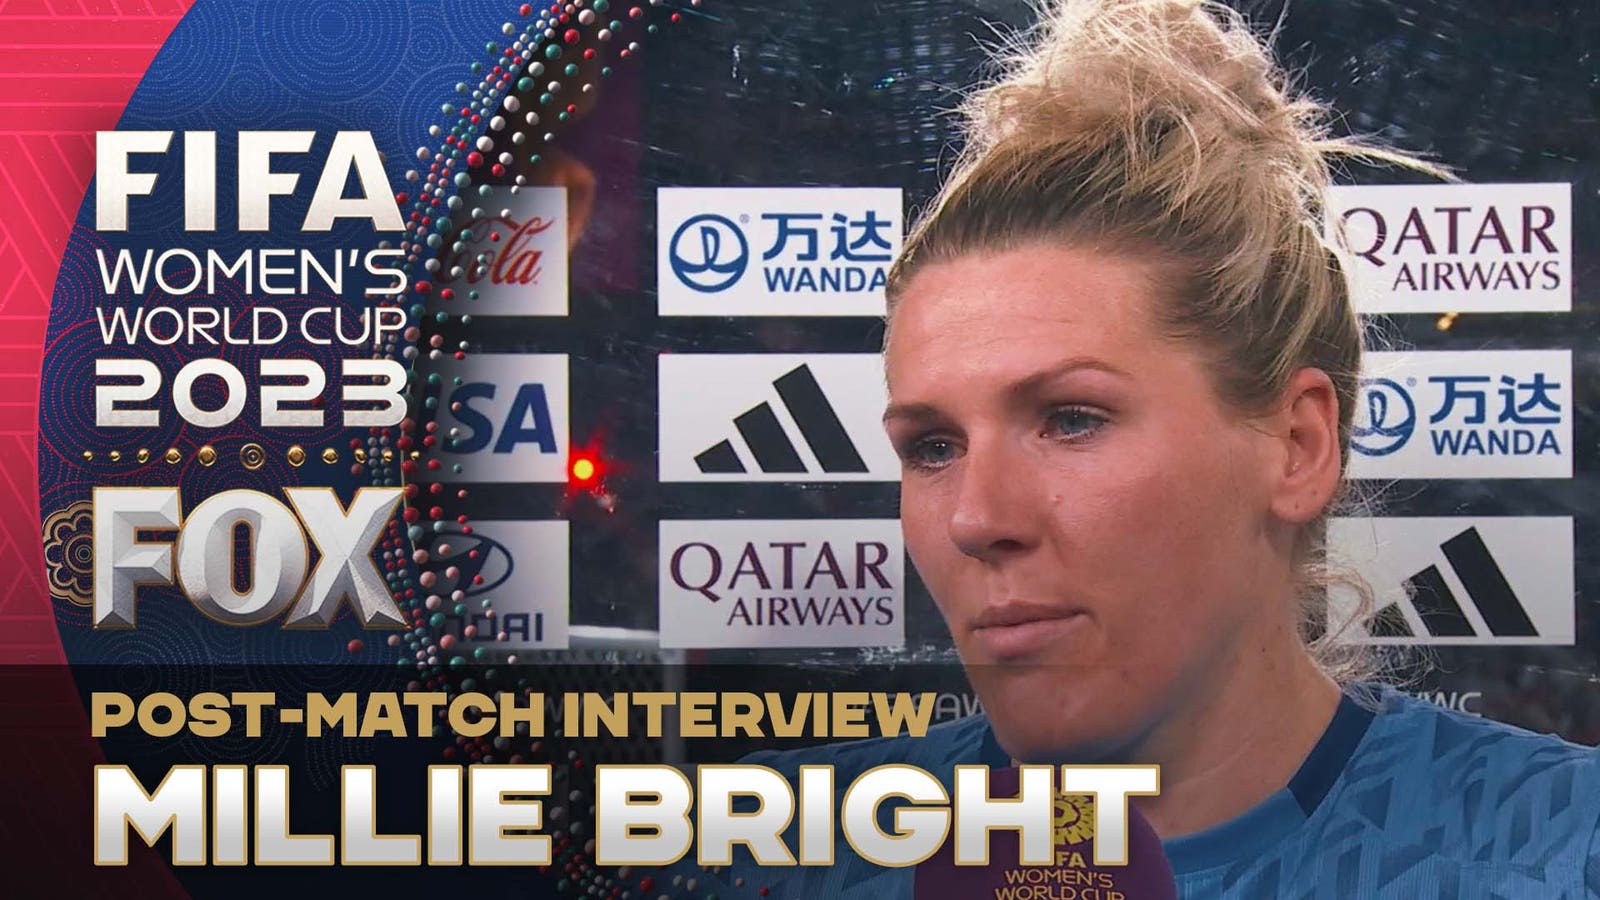 'It's a proud moment' — England's Millie Bright after loss to Spain in World Cup Final